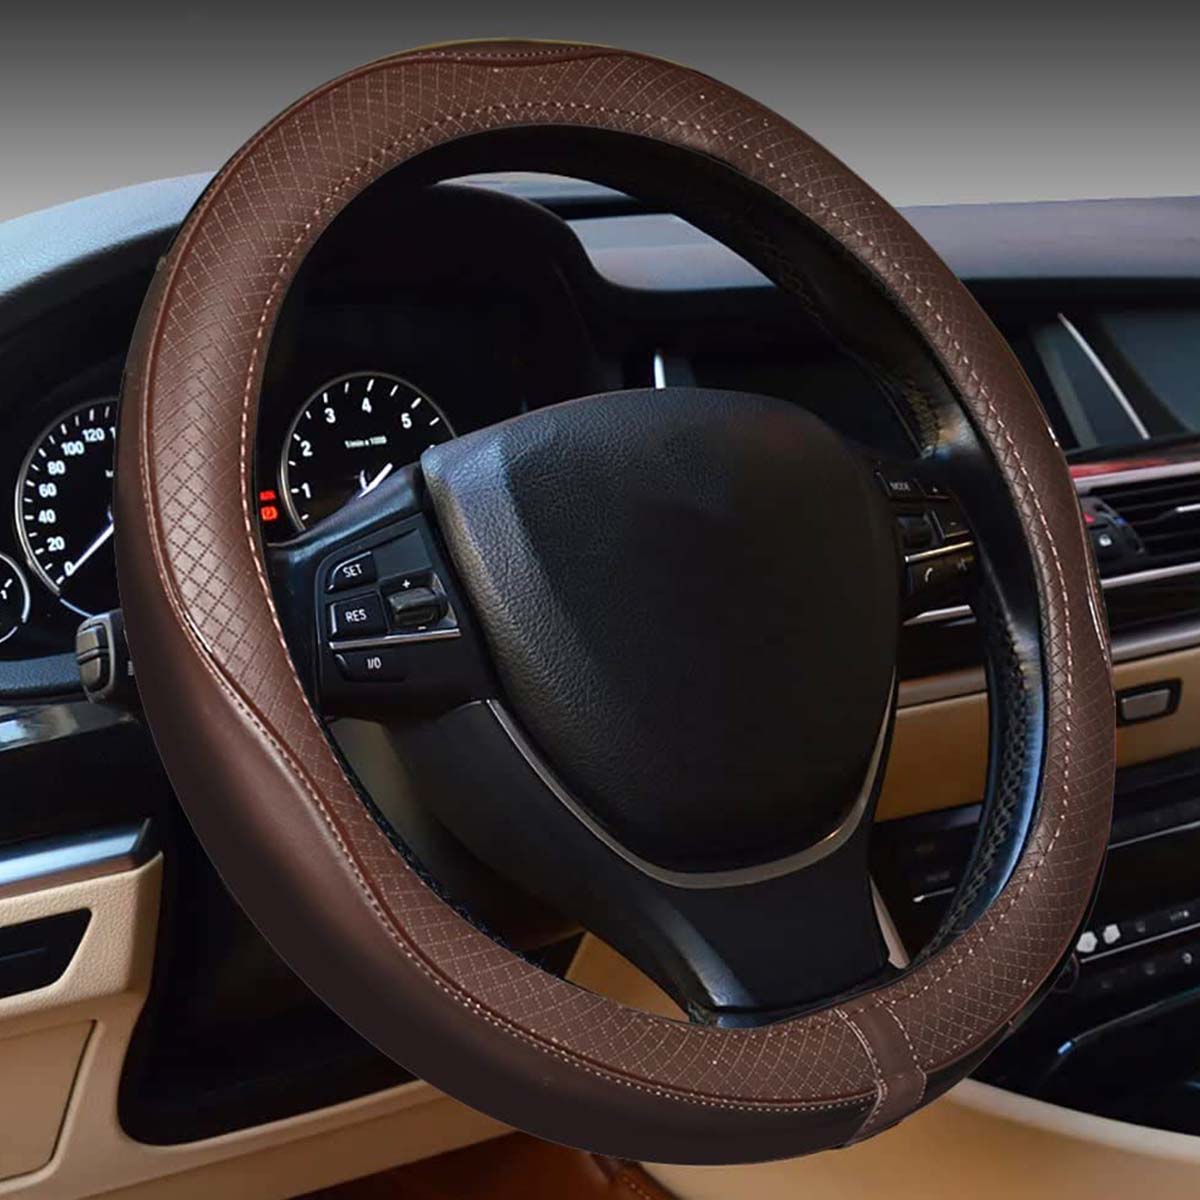 Car Steering Wheel Cover, Custom For Your Cars, Anti-Slip, Safety, Soft, Breathable, Heavy Duty, Thick, Full Surround, Sports Style, Car Accessories PF18990 - Delicate Leather